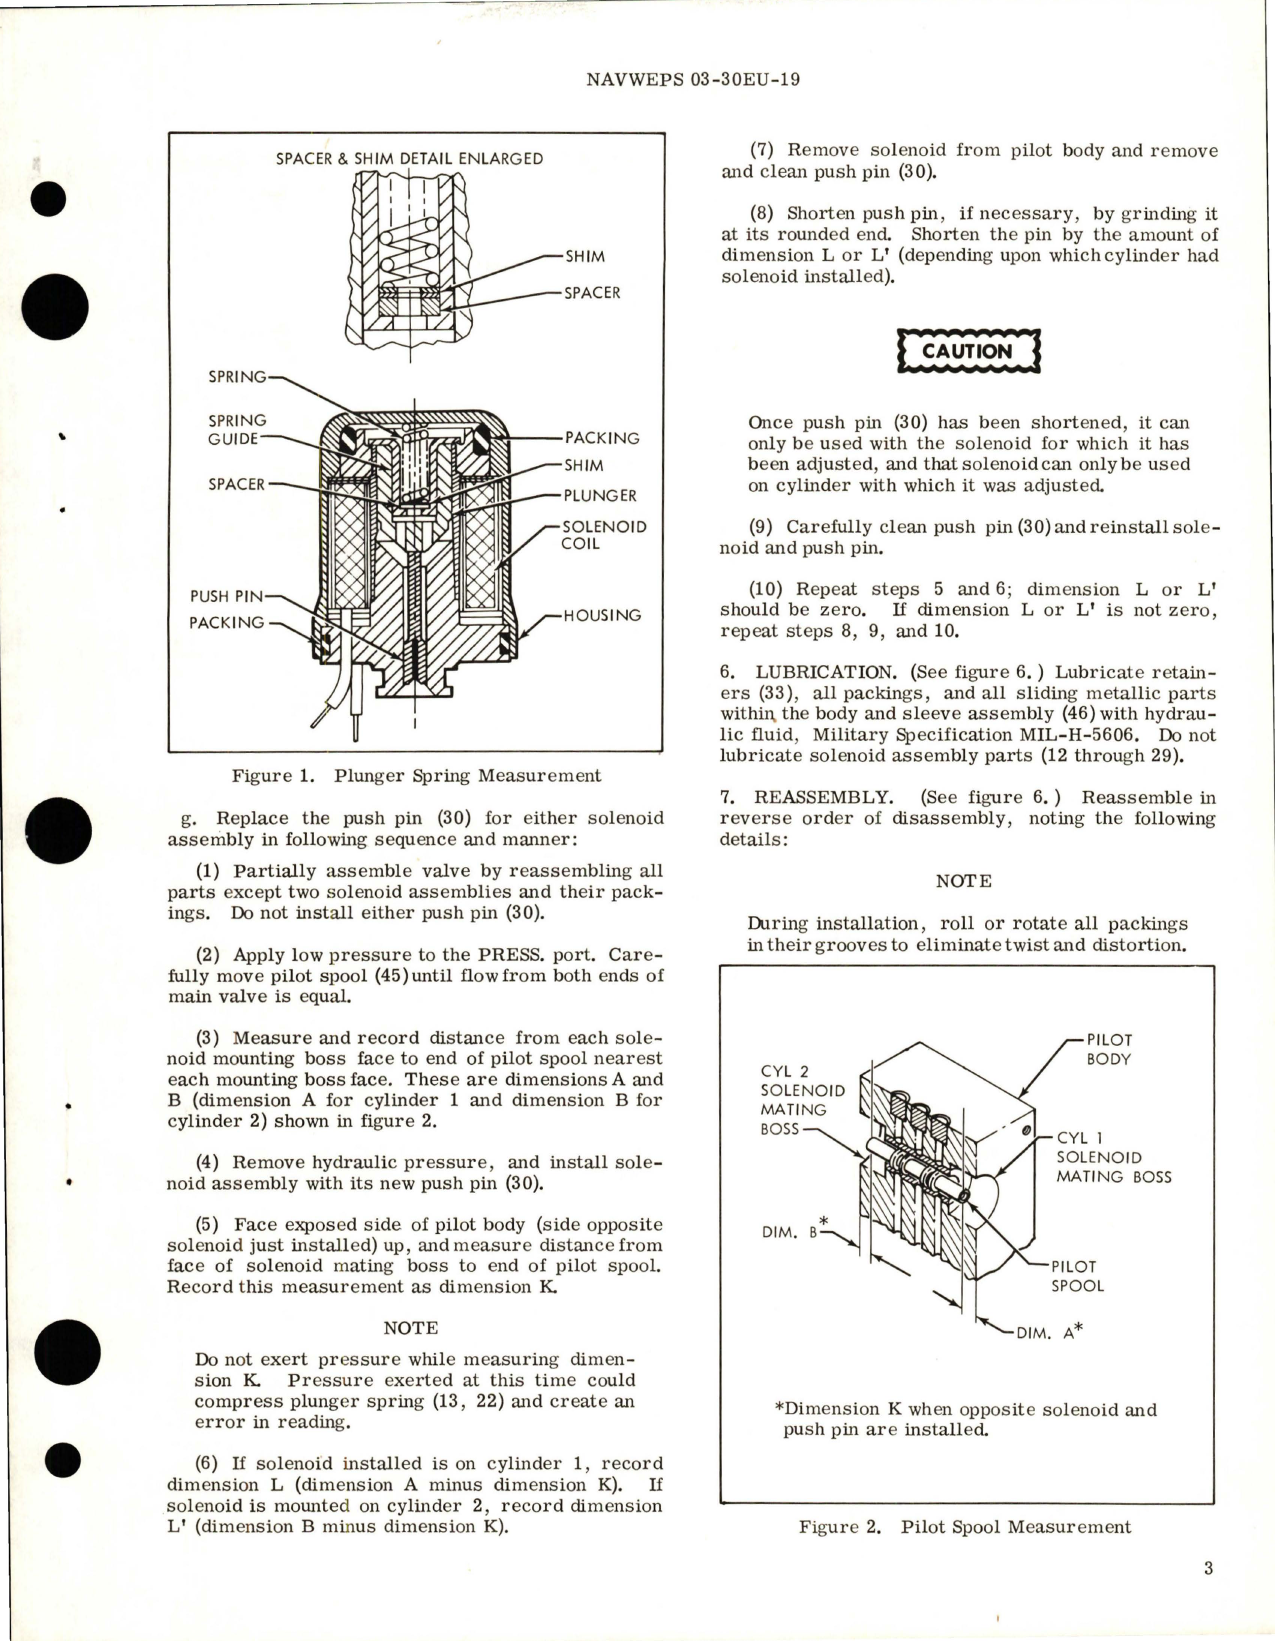 Sample page 5 from AirCorps Library document: Overhaul Instructions with Parts Breakdown for Selector Valve Pilot Operated 4-Way 3-Position - Part AV14J1147 - Model C 